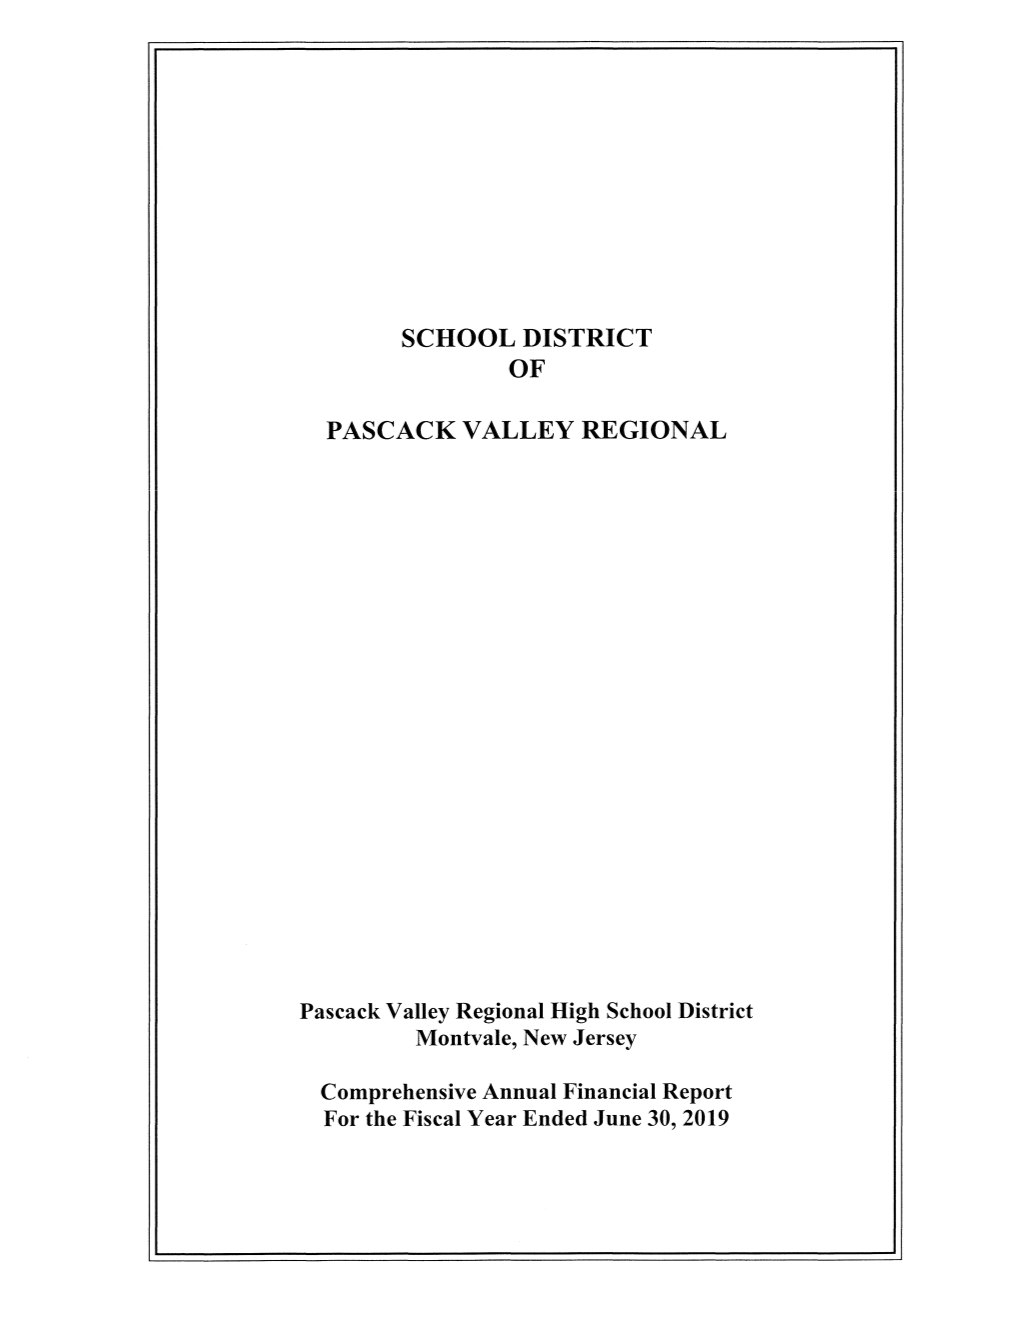 School District of Pascack Valley Regional